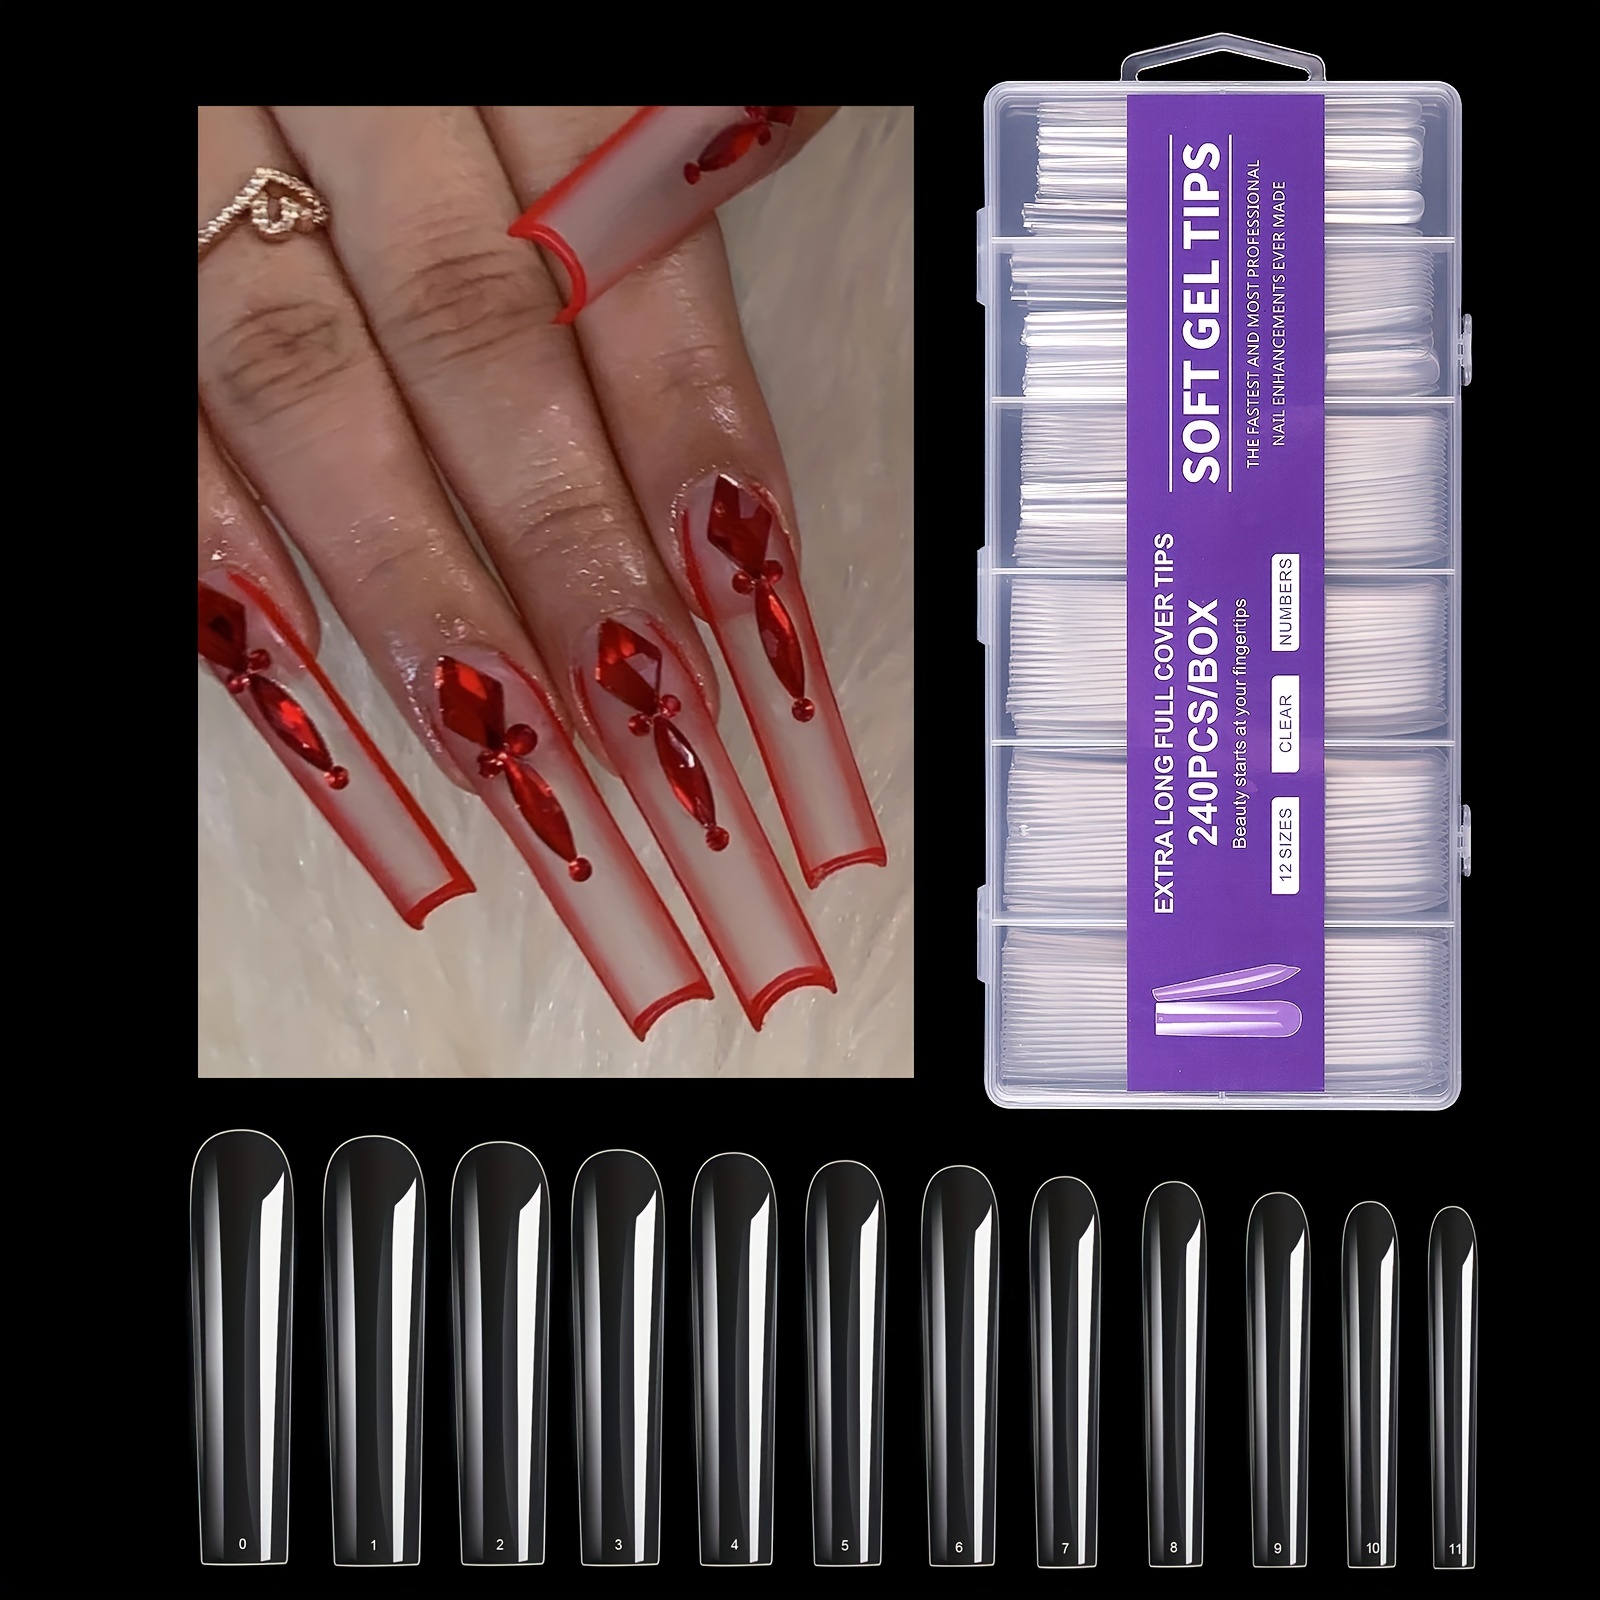 

240pcs Full Cover Long Coffin Gel Nail Tips Set - 12 Sizes For Diy Nails Salon At Home - Clear Acrylic Press On Nails With French Tips For Beautiful And Durable Manicure